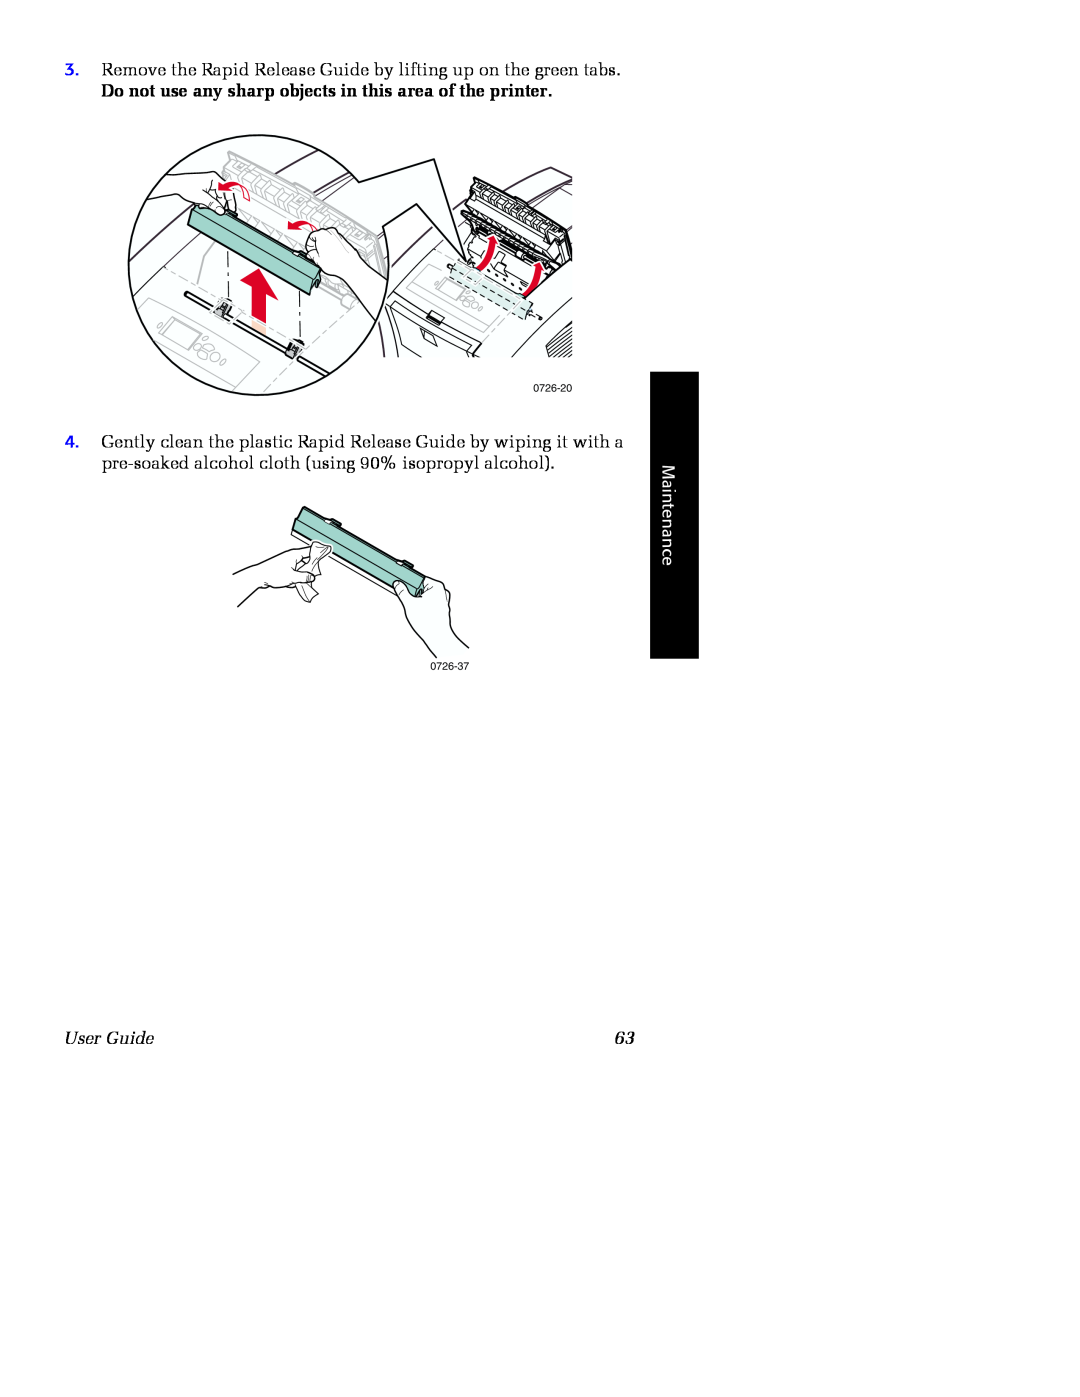 Xerox Phaser 860 manual Do not use any sharp objects in this area of the printer, Maintenance, User Guide, 0726-20, 0726-37 